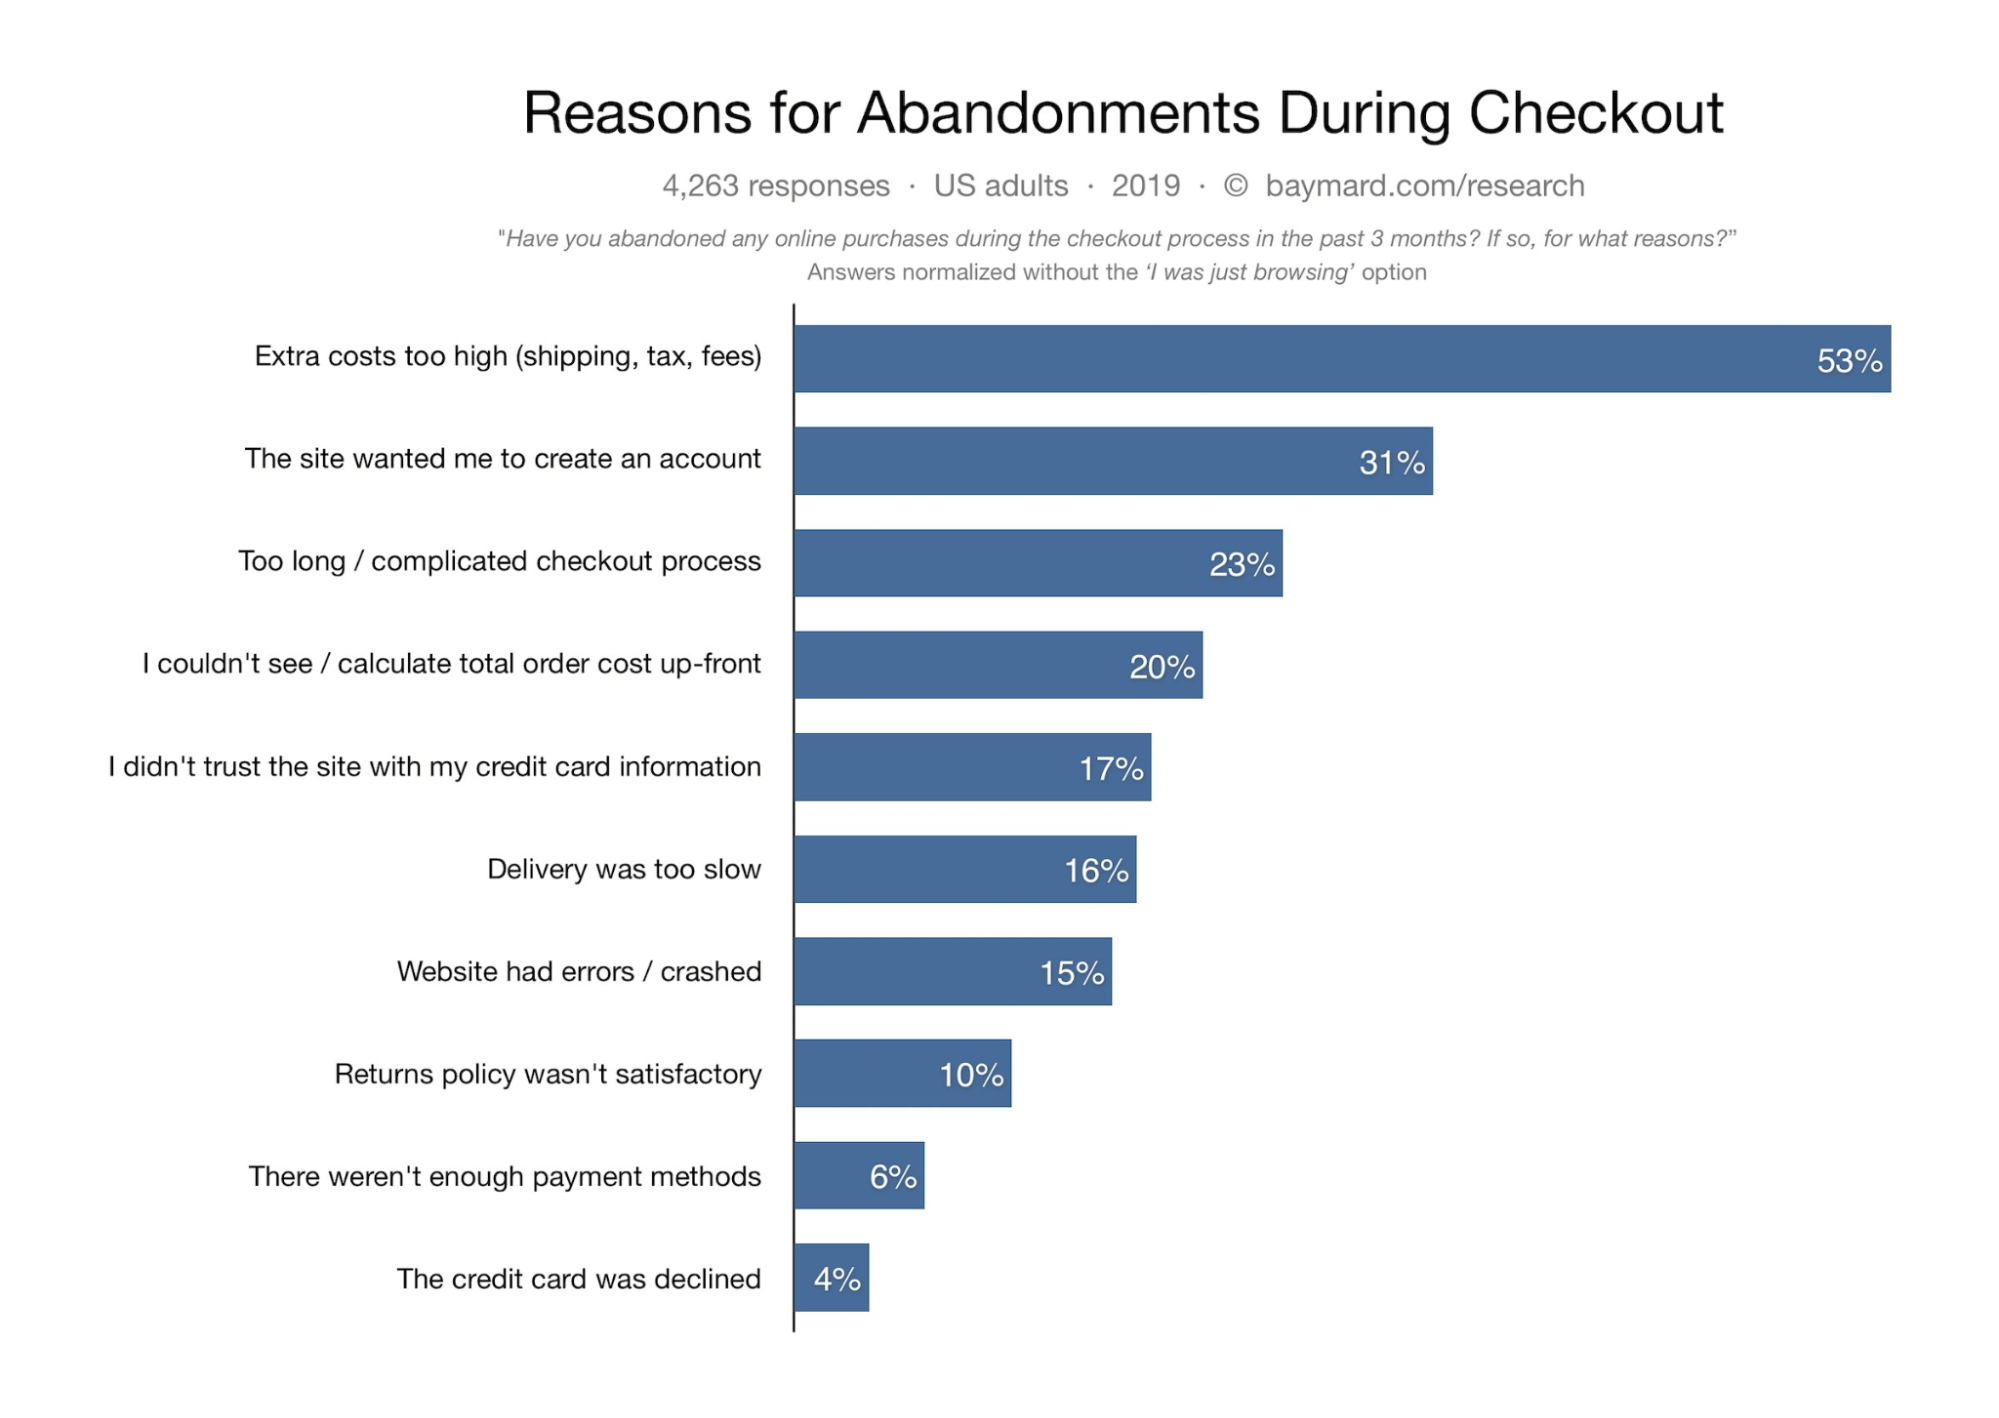 ecommerce reason for abandonment during checkout